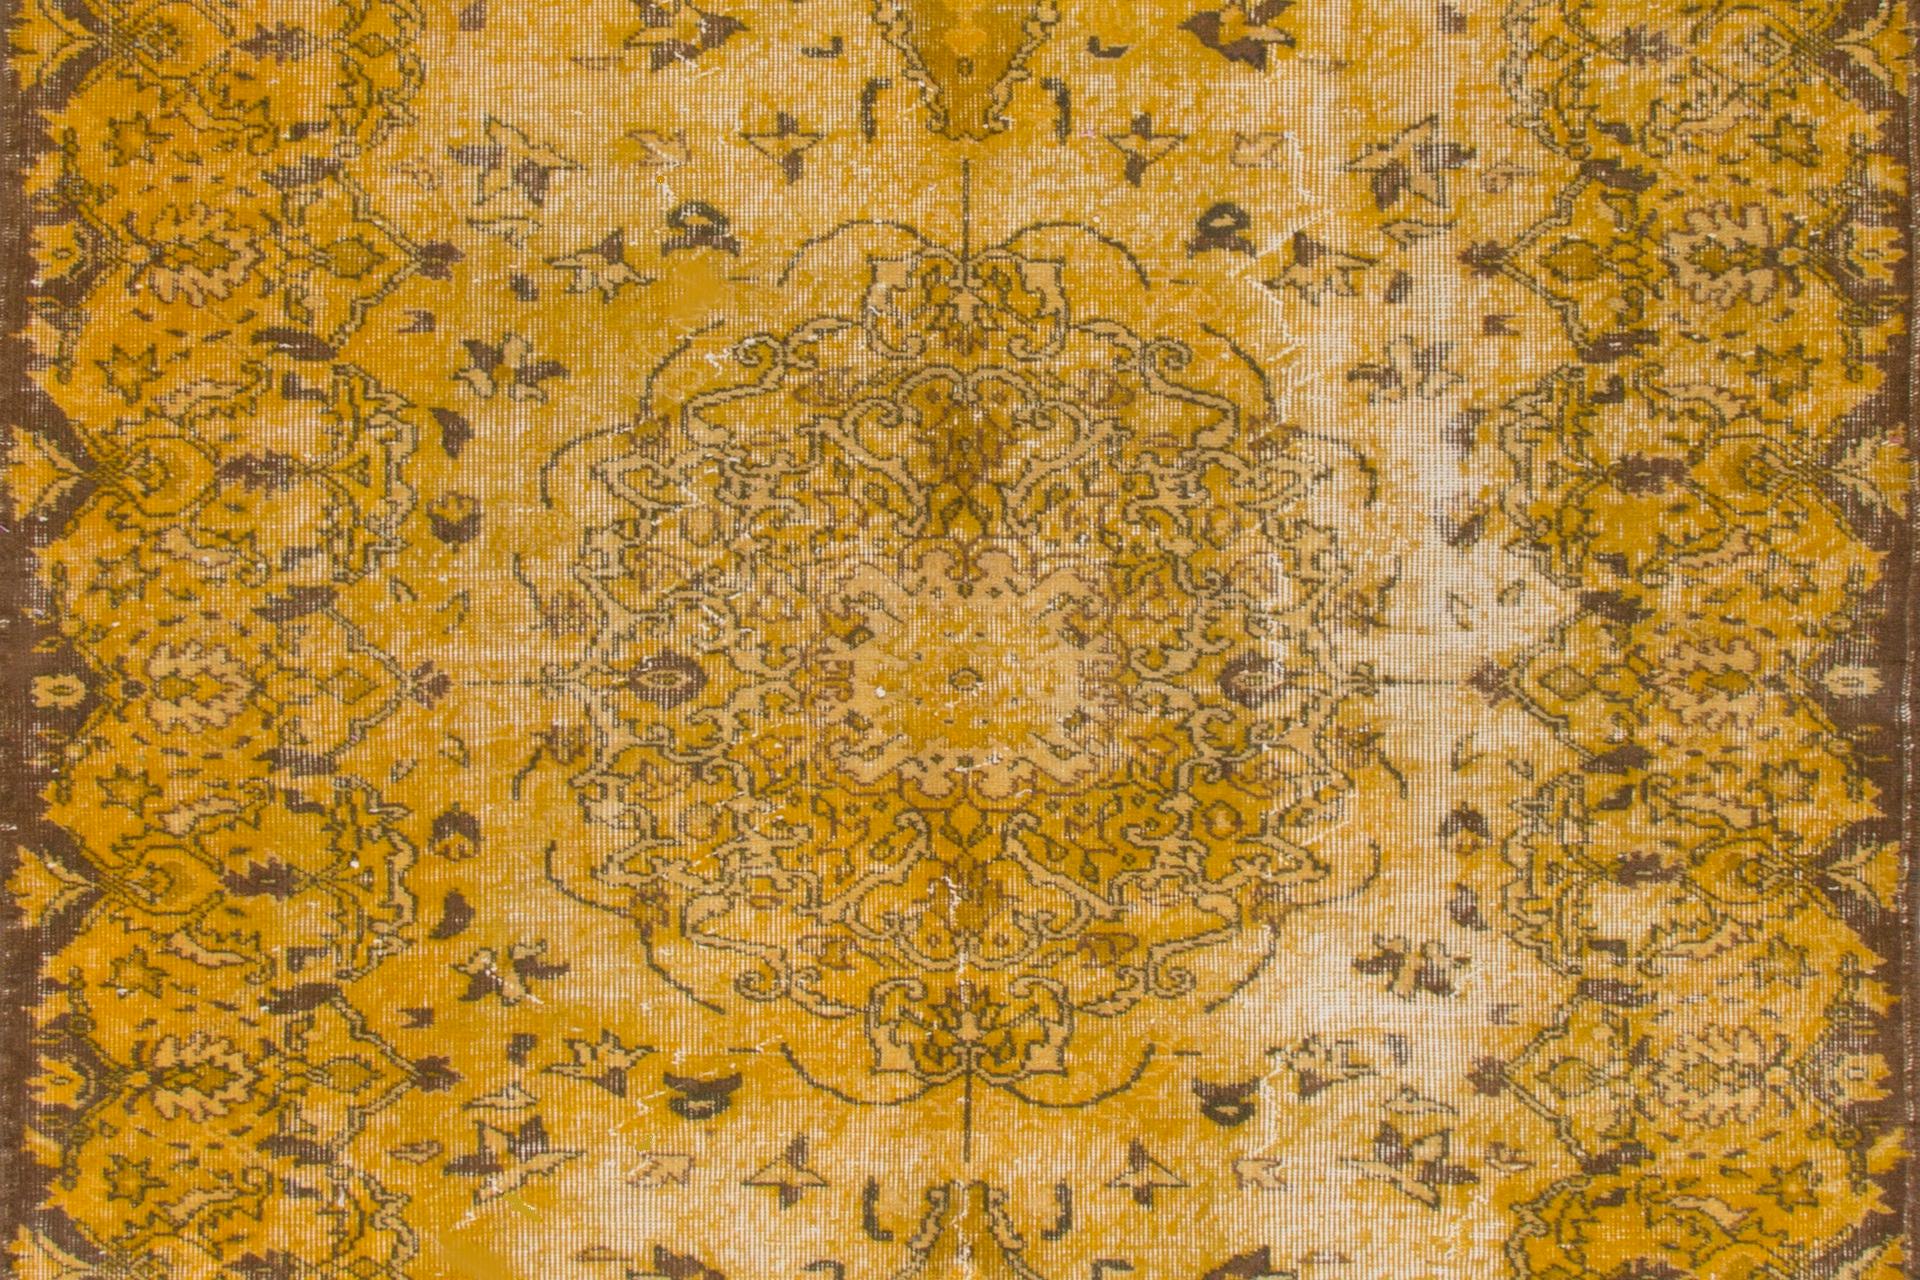 Infuse your living space with warmth and vibrancy with this stunning modern handmade Turkish rug in yellow. 
It made of low wool pile on cotton foundation. 
Handcrafted by skilled artisans, this rug embodies the perfect blend of traditional